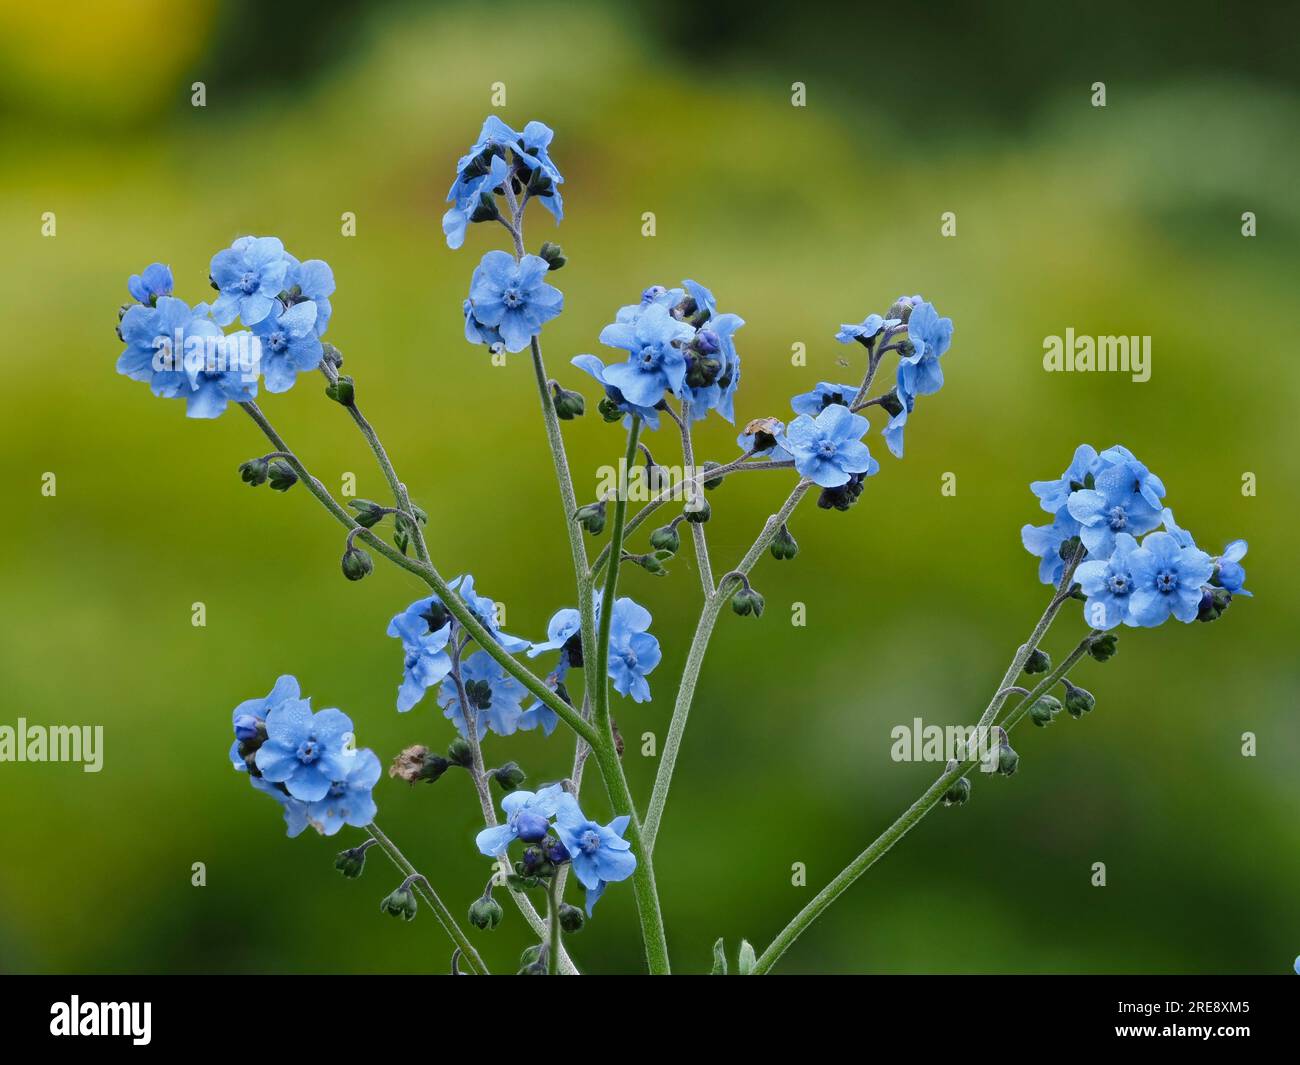 Blue summer flowers of the hardy annual Chinese forget-me-not, Cynoglossum amabile Stock Photo